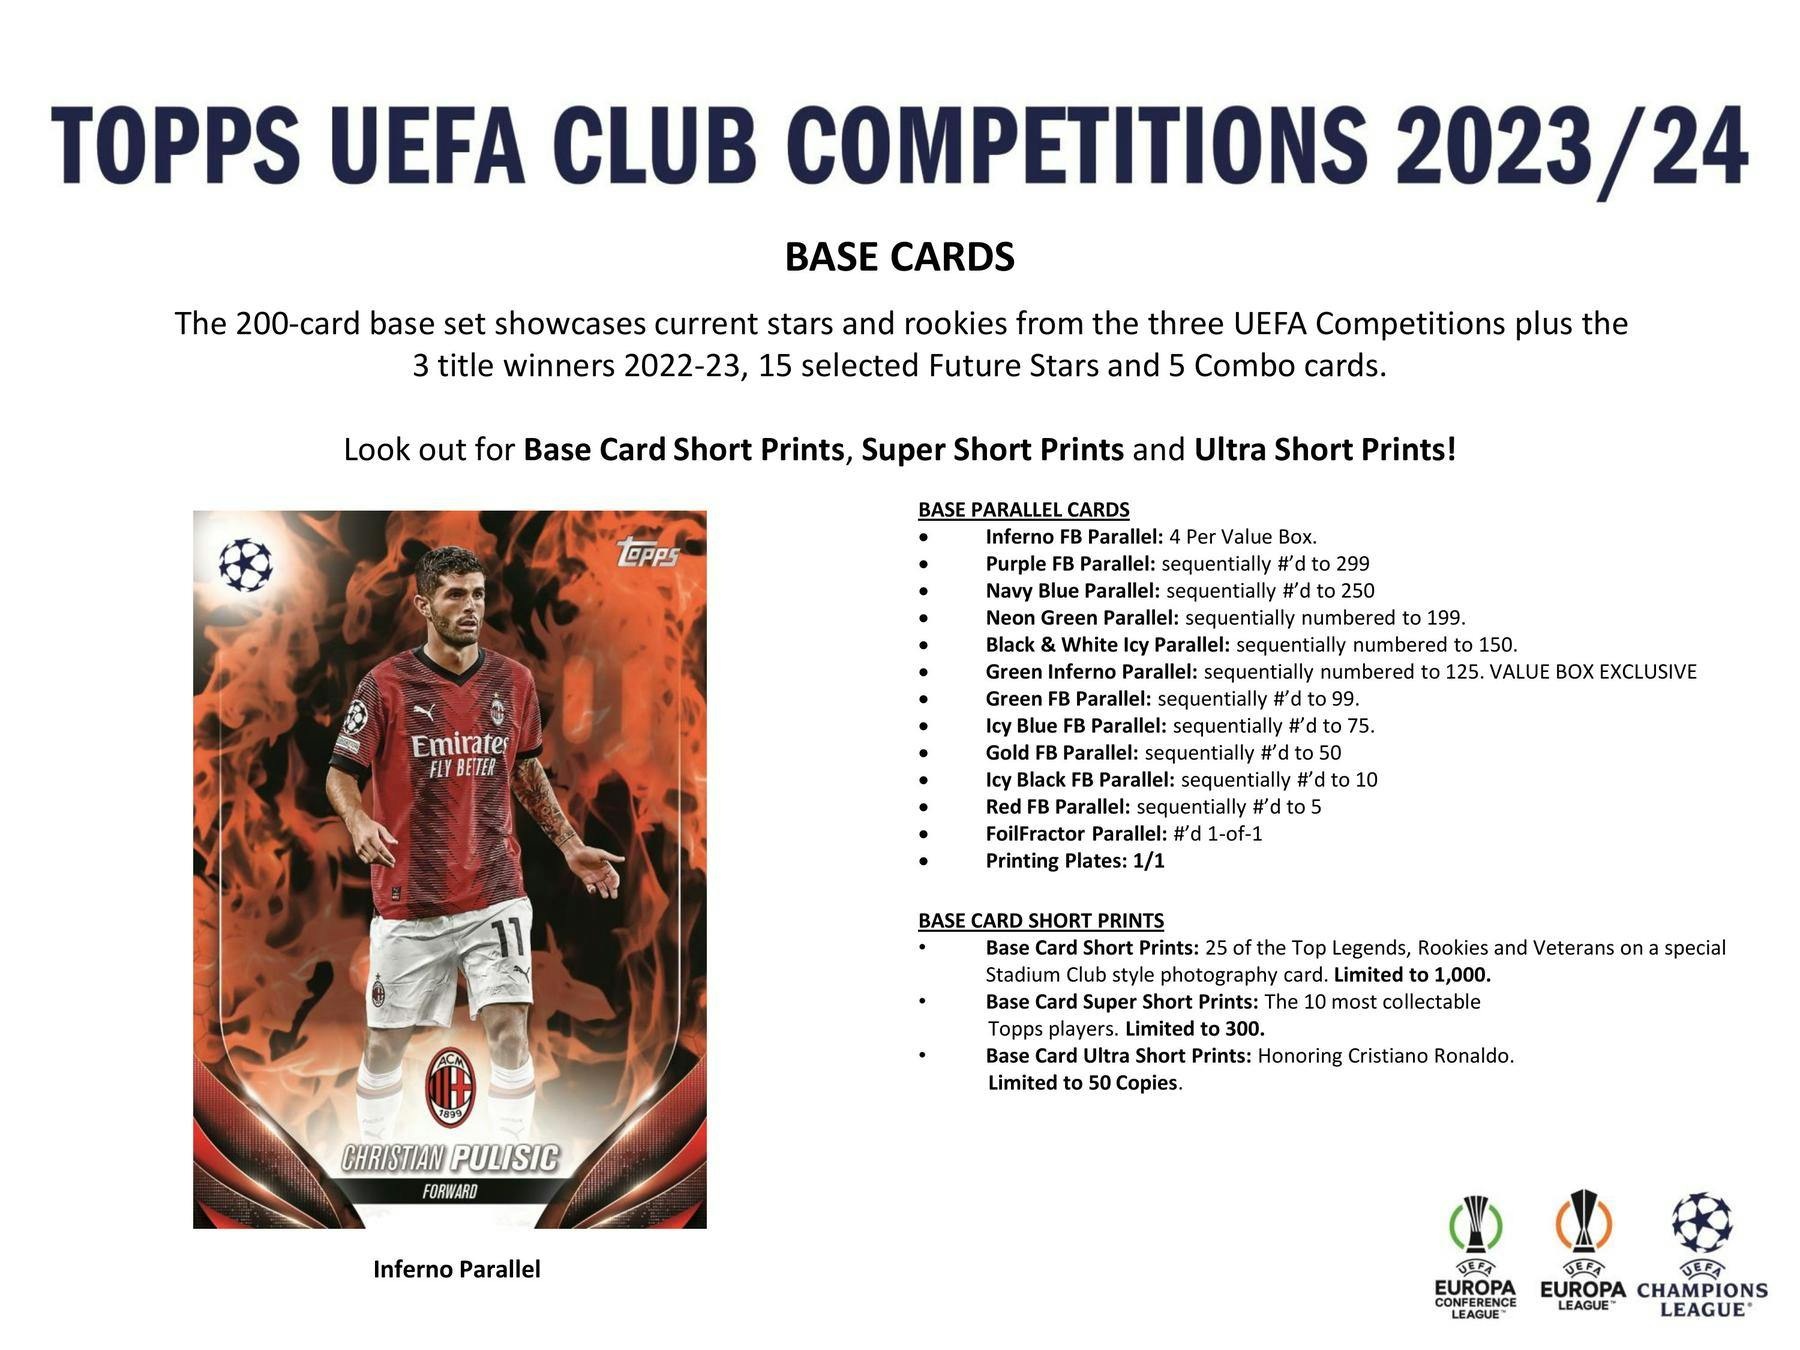 2023-24 Topps UEFA Club Competitions Soccer Blaster Value Box 887521123629 - King Card Canada